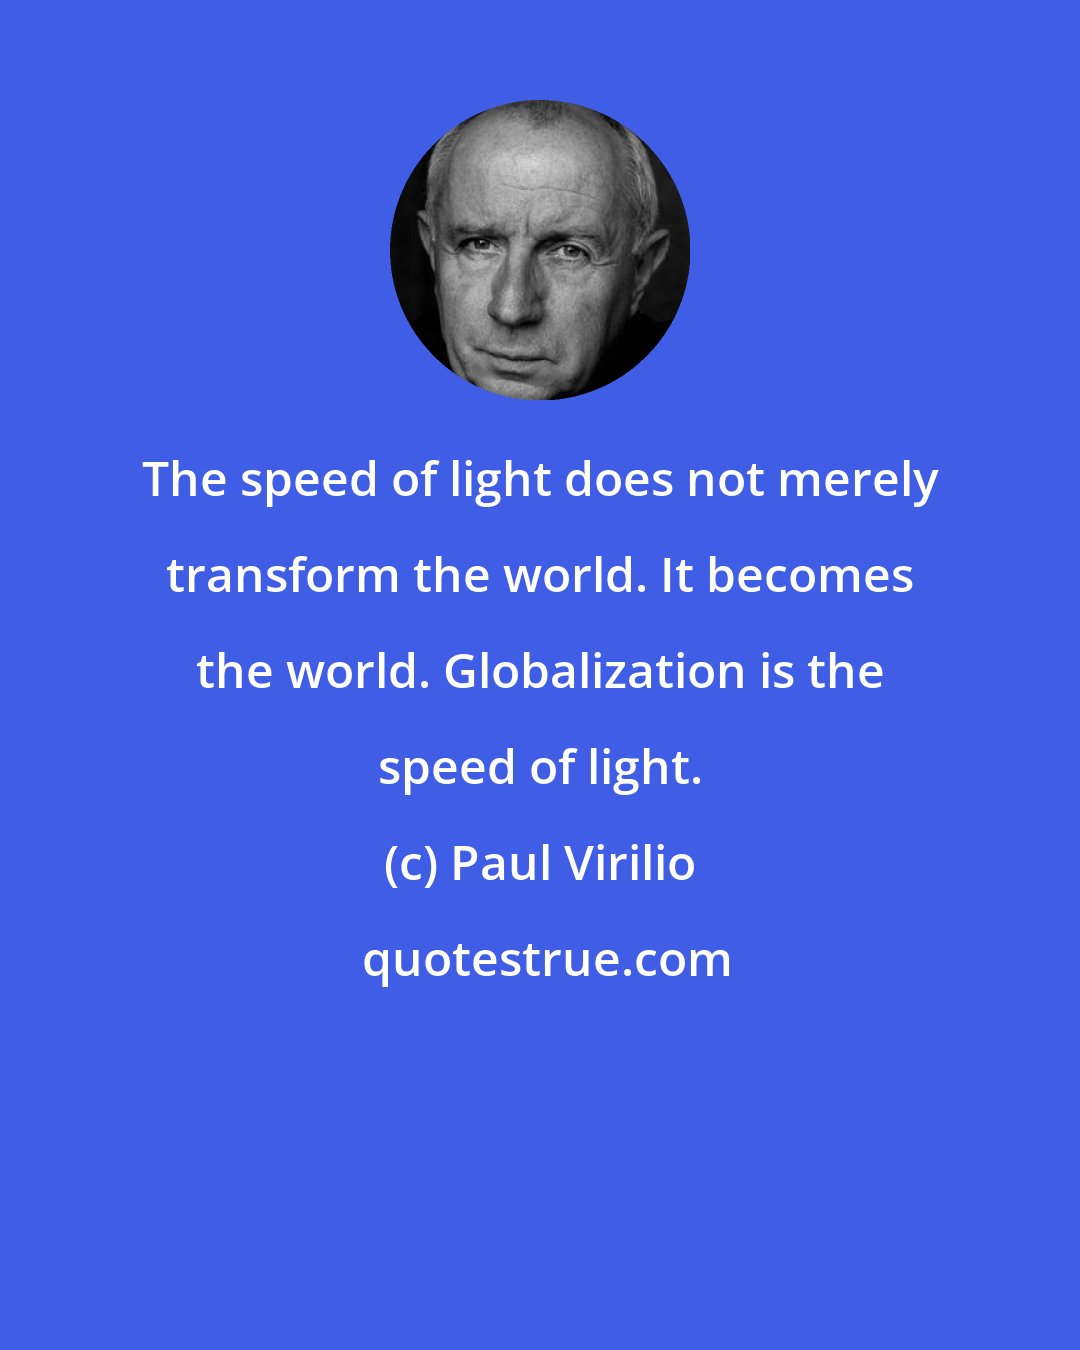 Paul Virilio: The speed of light does not merely transform the world. It becomes the world. Globalization is the speed of light.